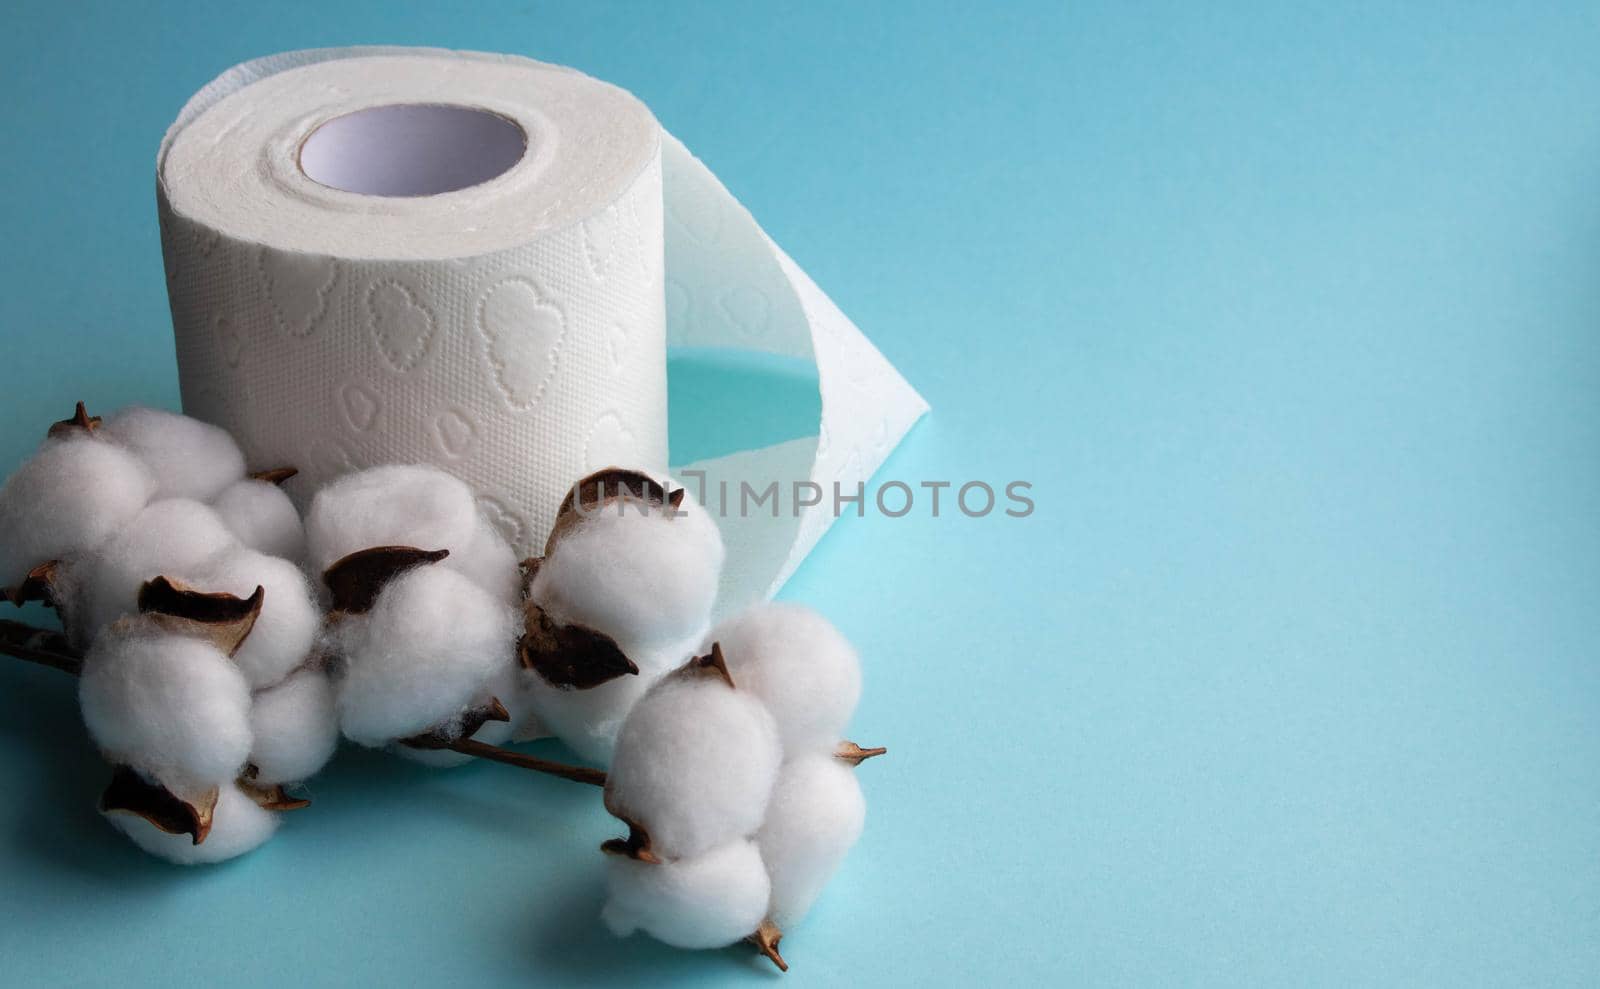 Toilet paper roll isolated on a blue background, with a branch of fluffy cotton flowers by lapushka62